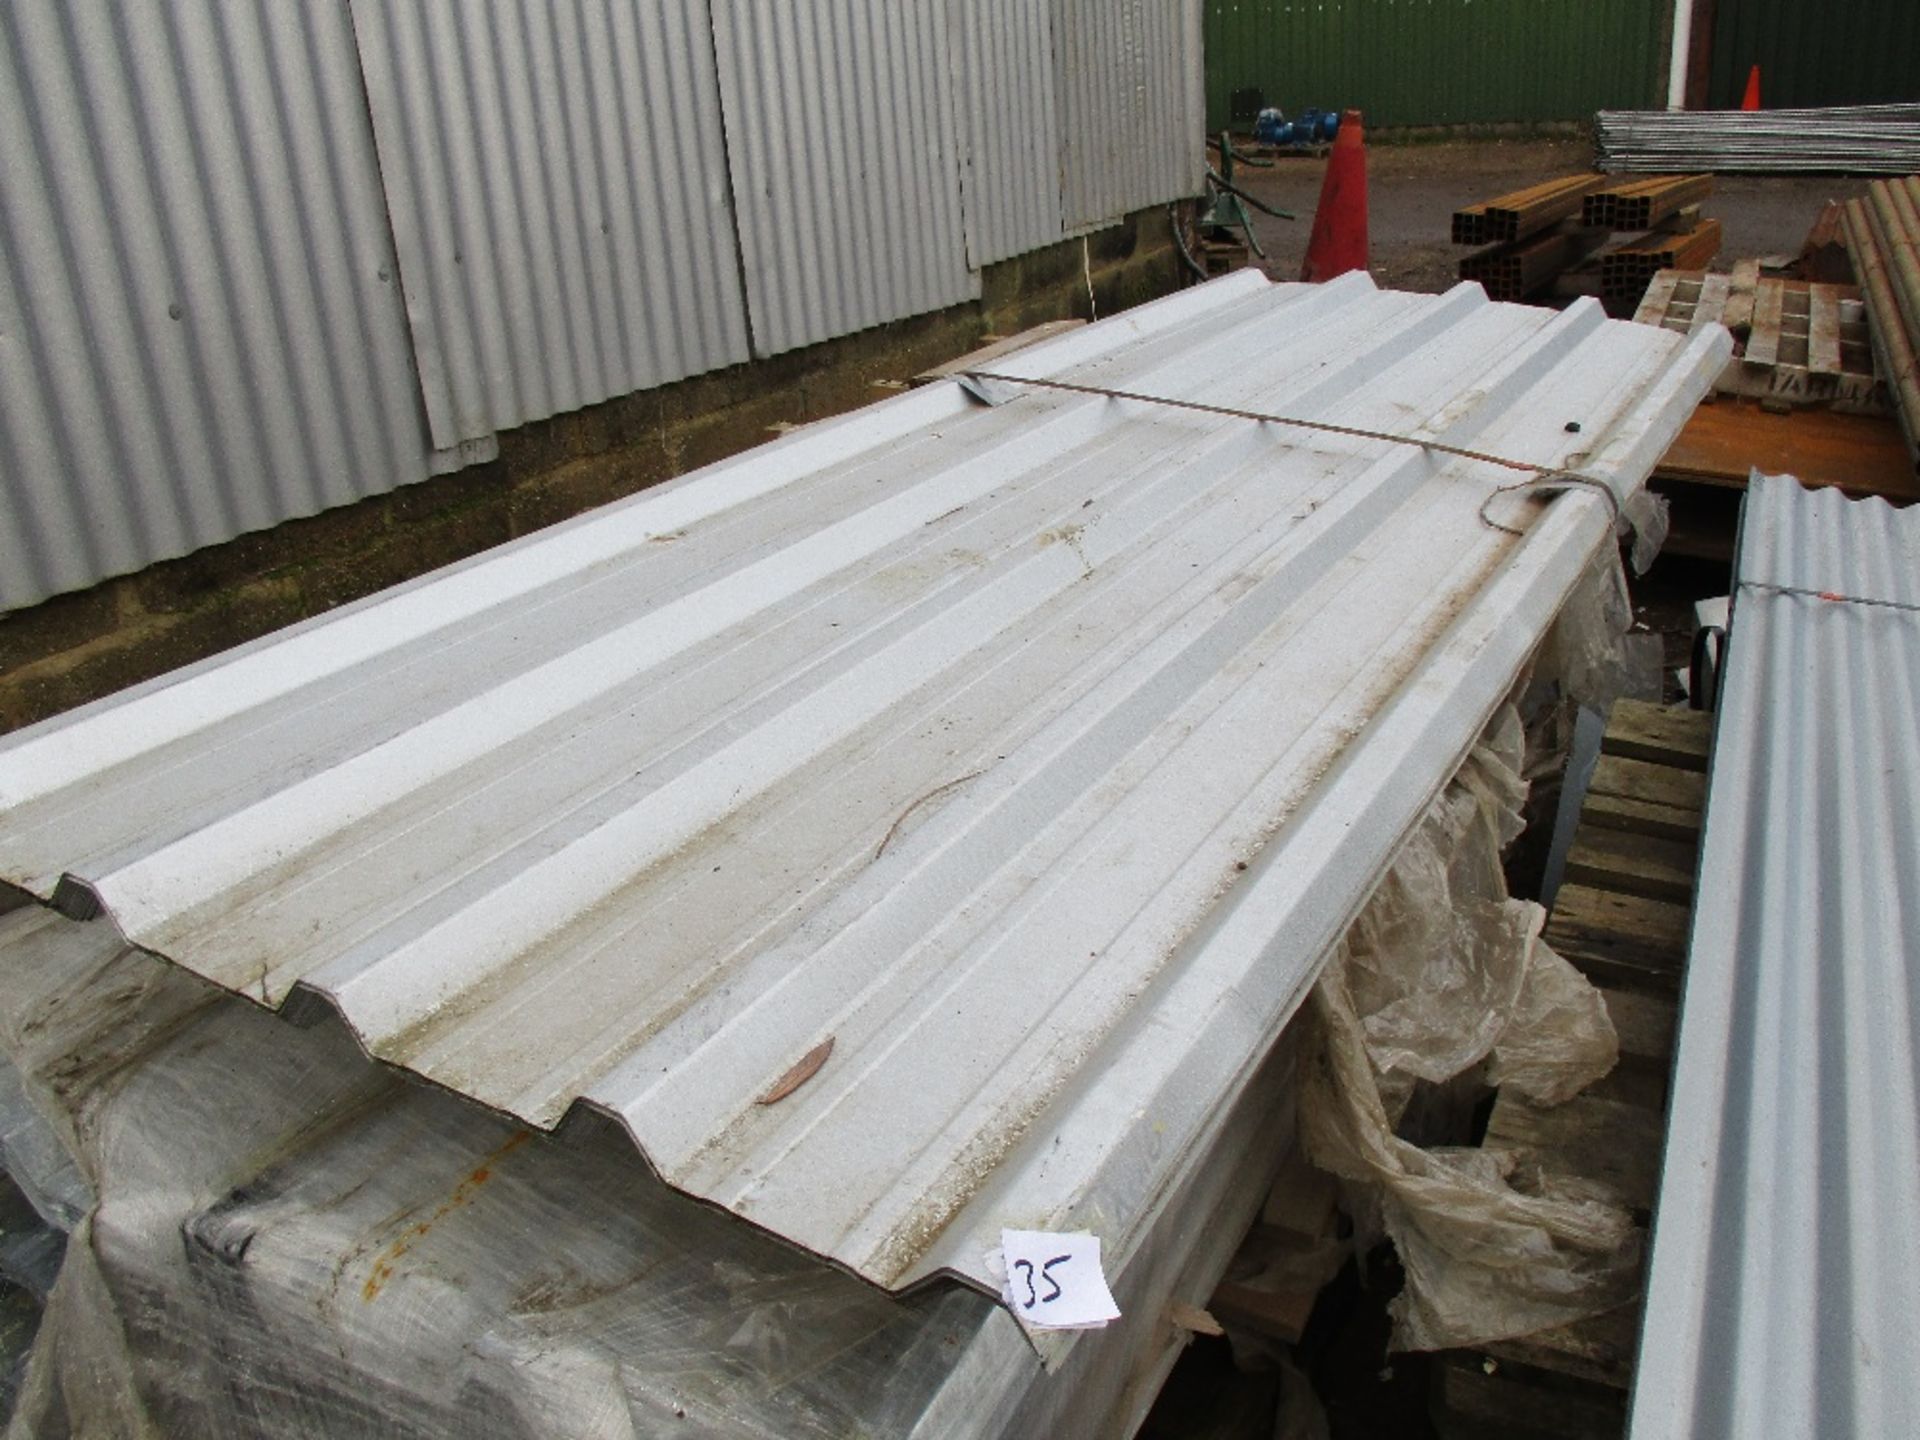 2 x packs of 25no. (50no in total) 8ft box profile roof sheets